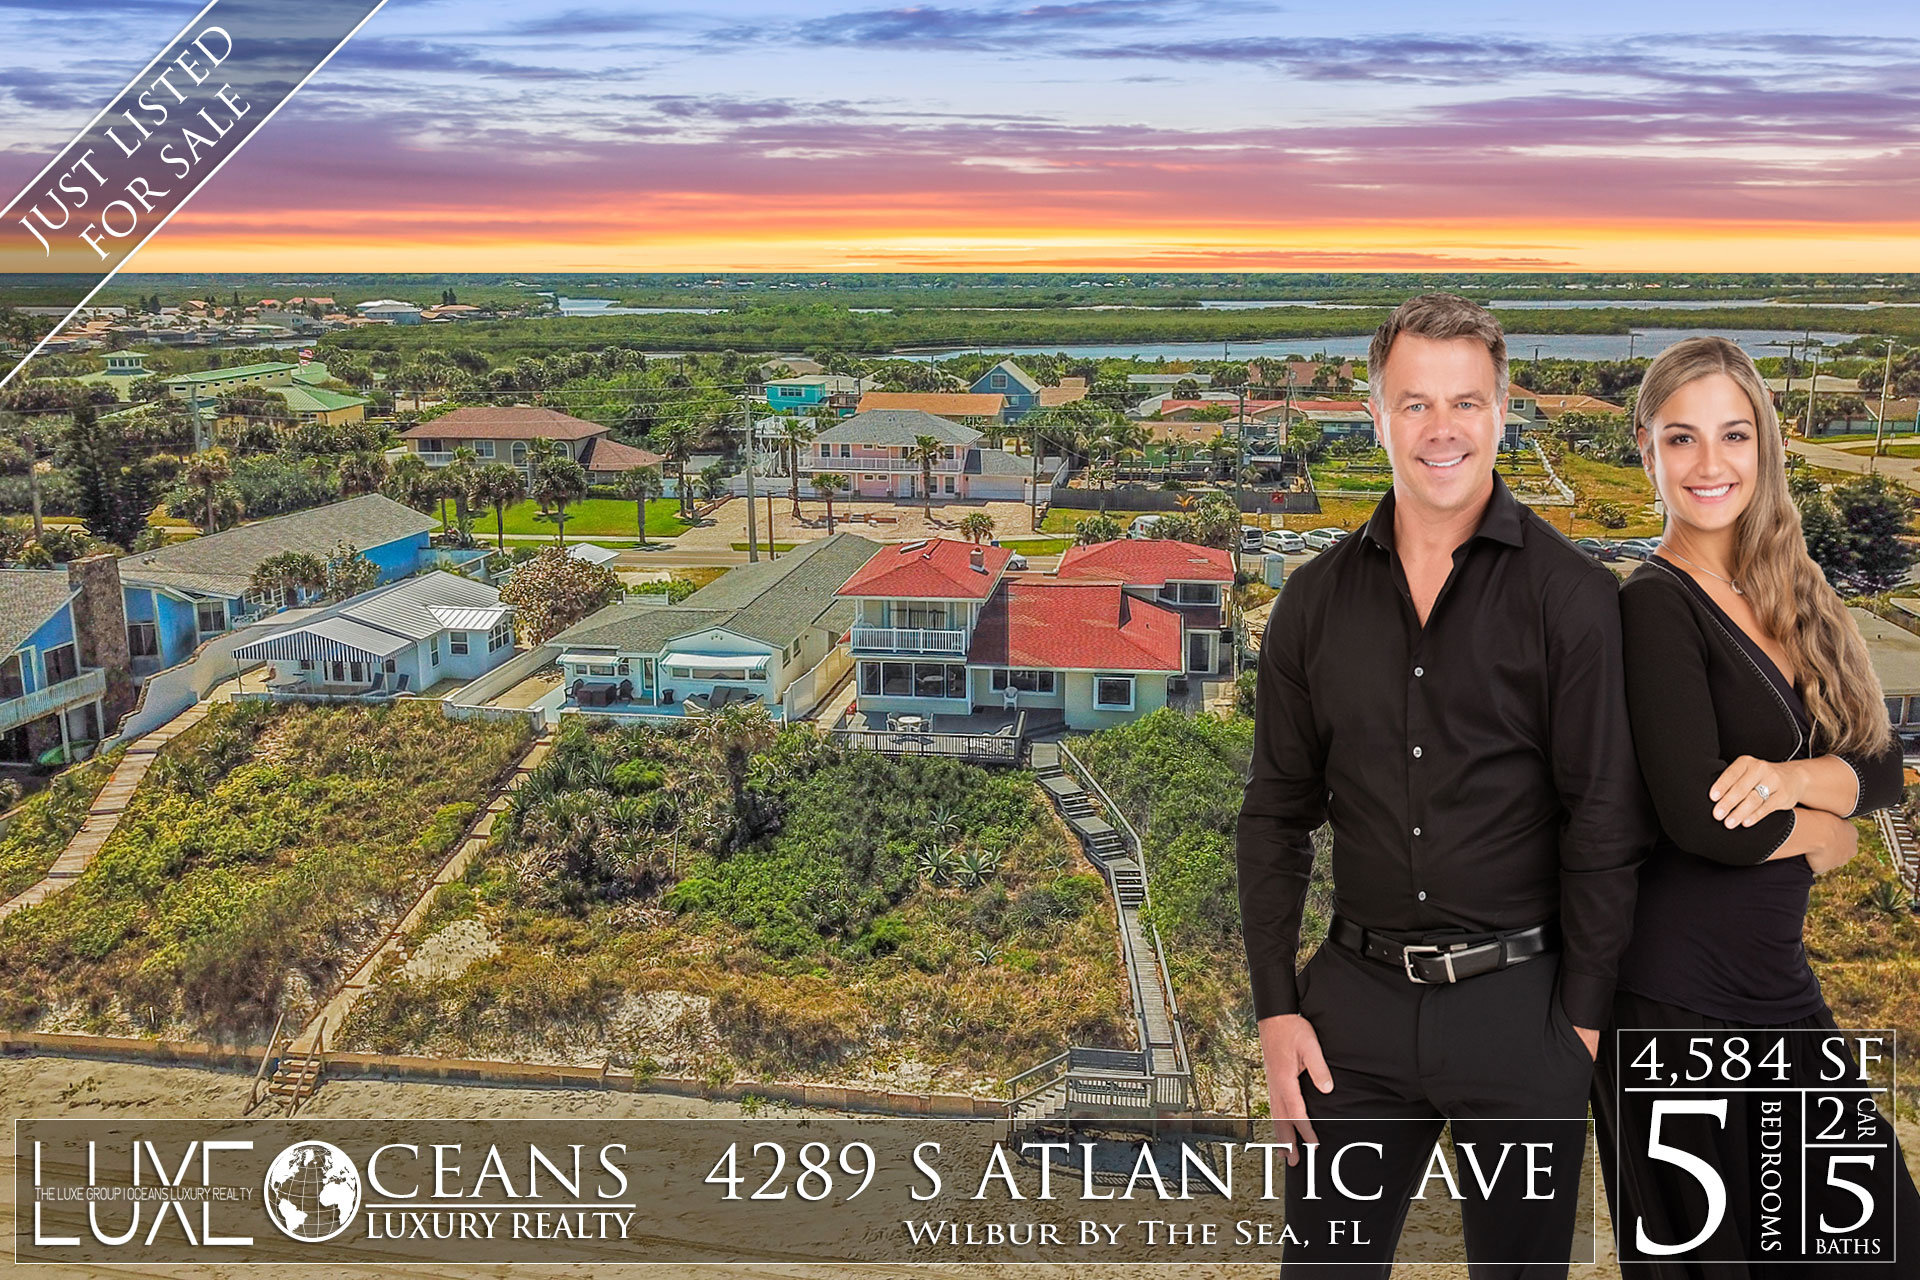 Ponce Inlet Oceanfront Homes For Sale - 4289 S Atlantic Ave Waterfront Homes For Sale